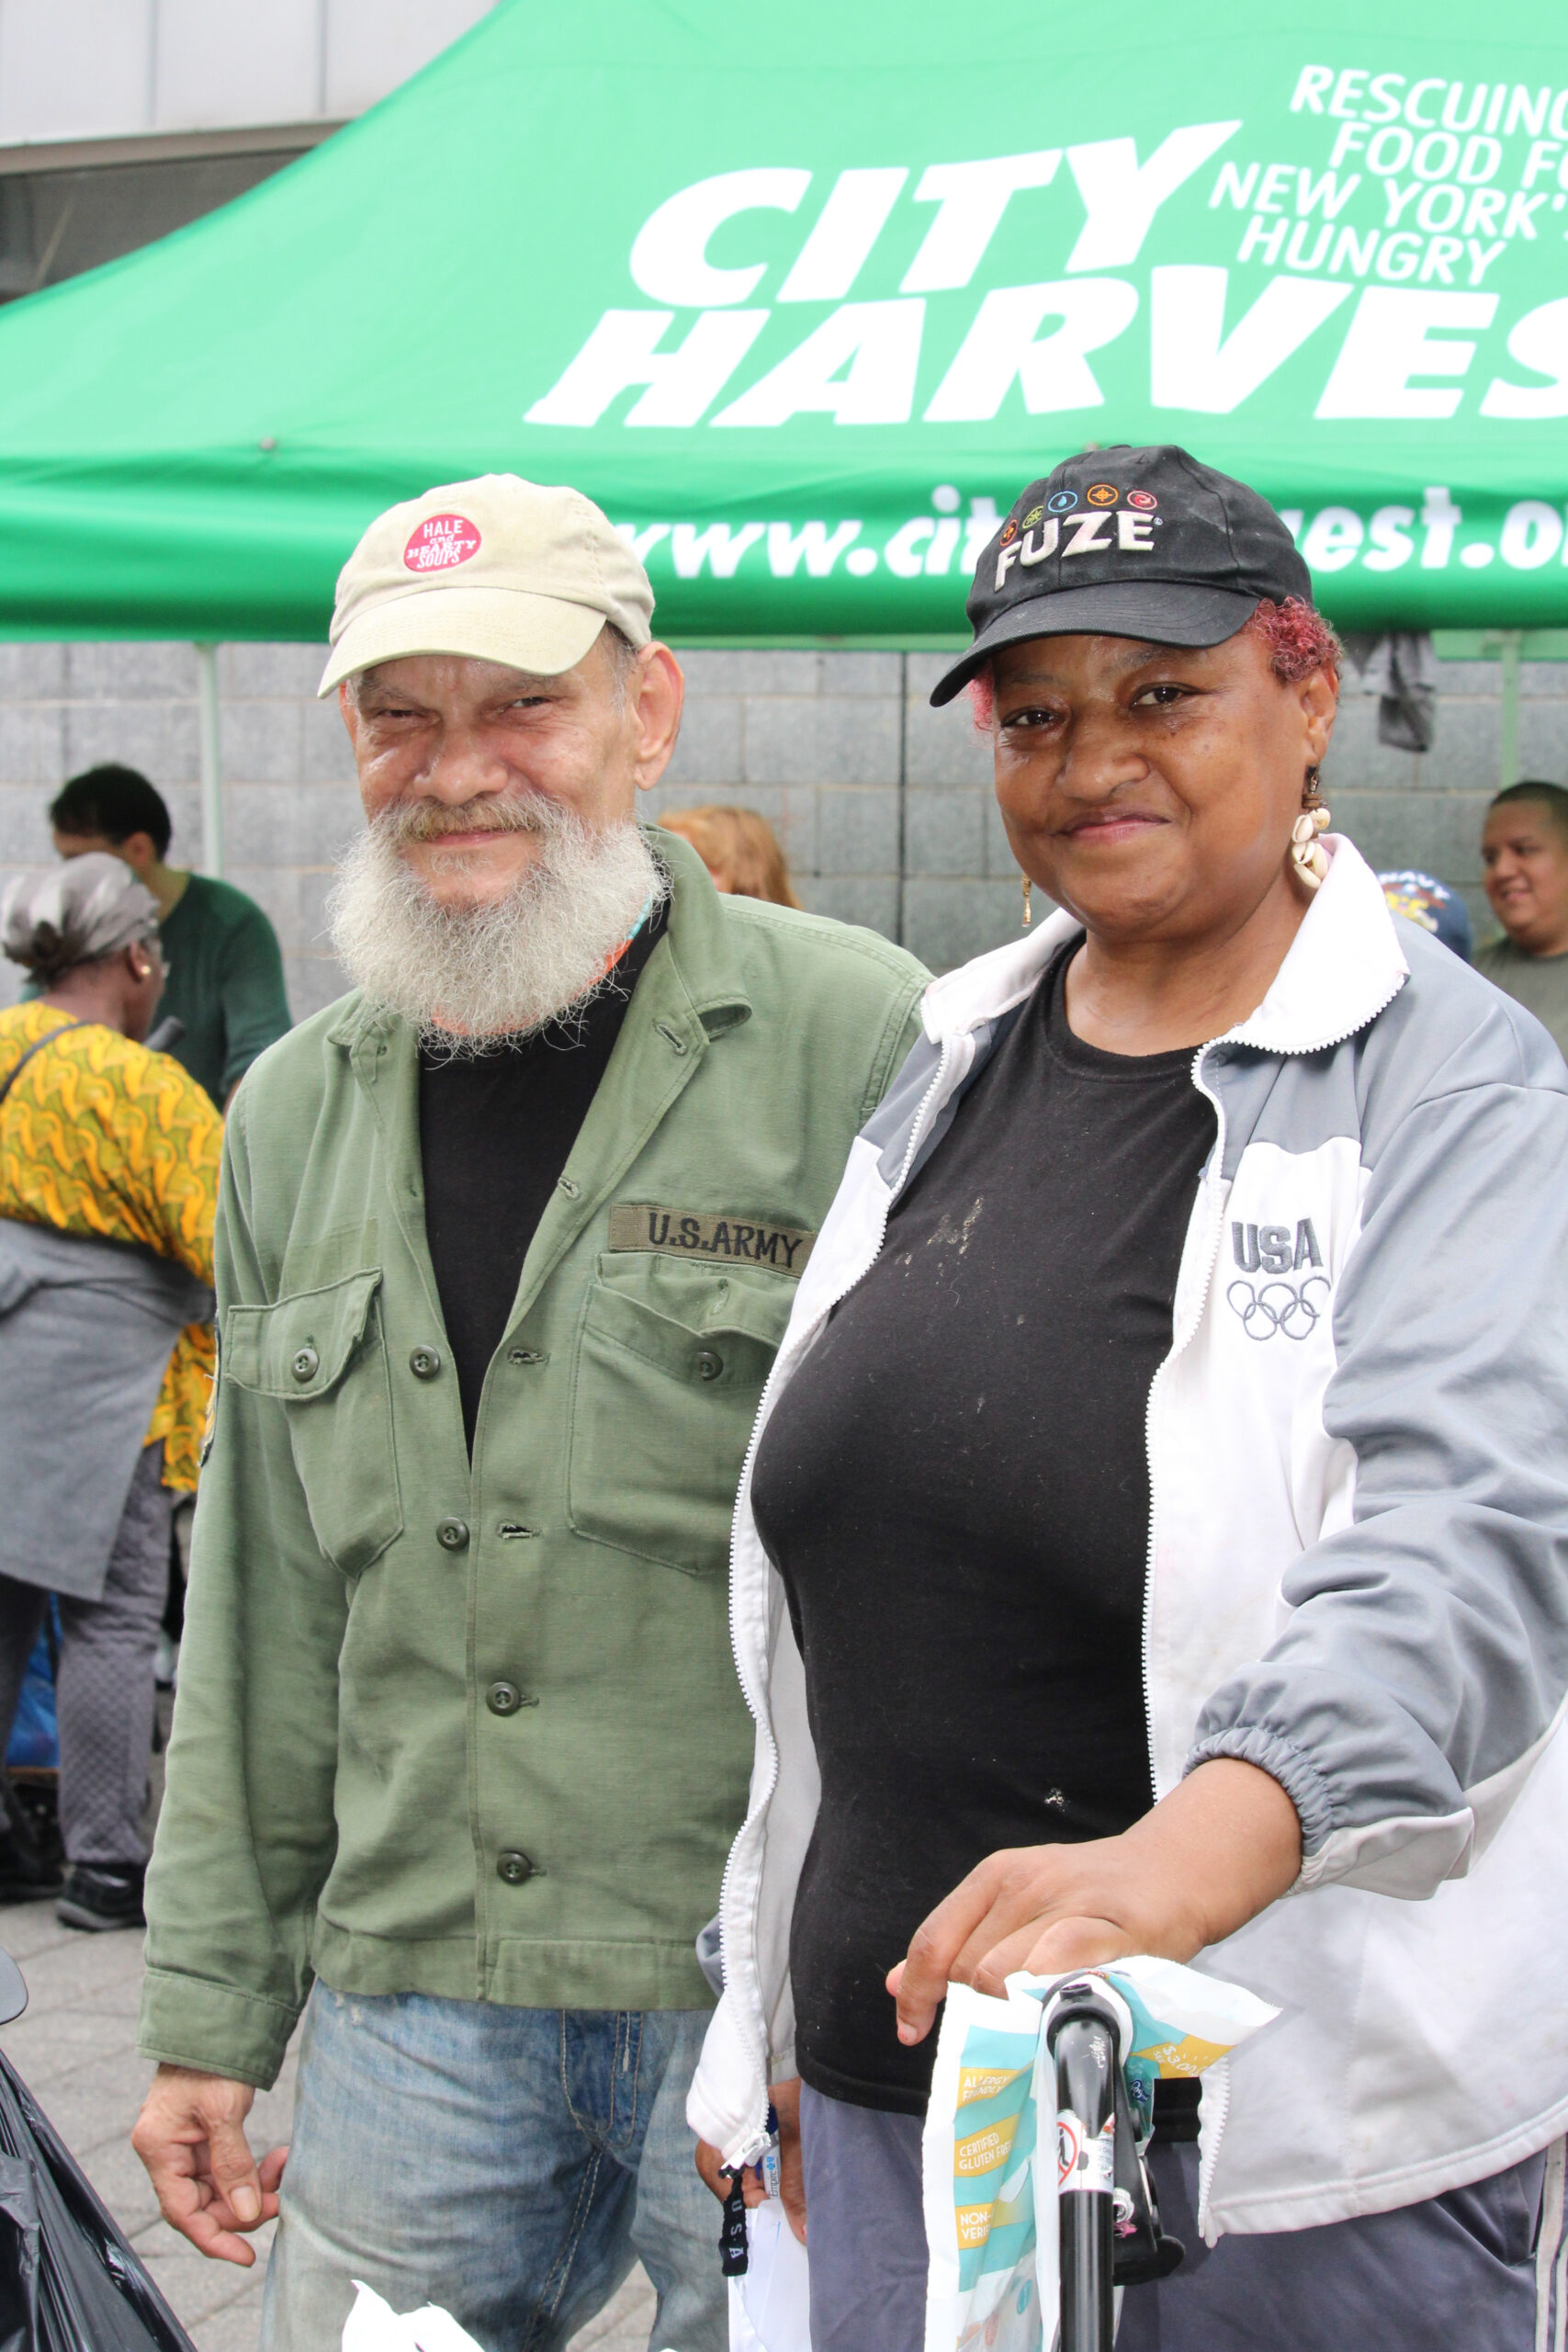 Two people attend a free mobile market in the Bronx. 